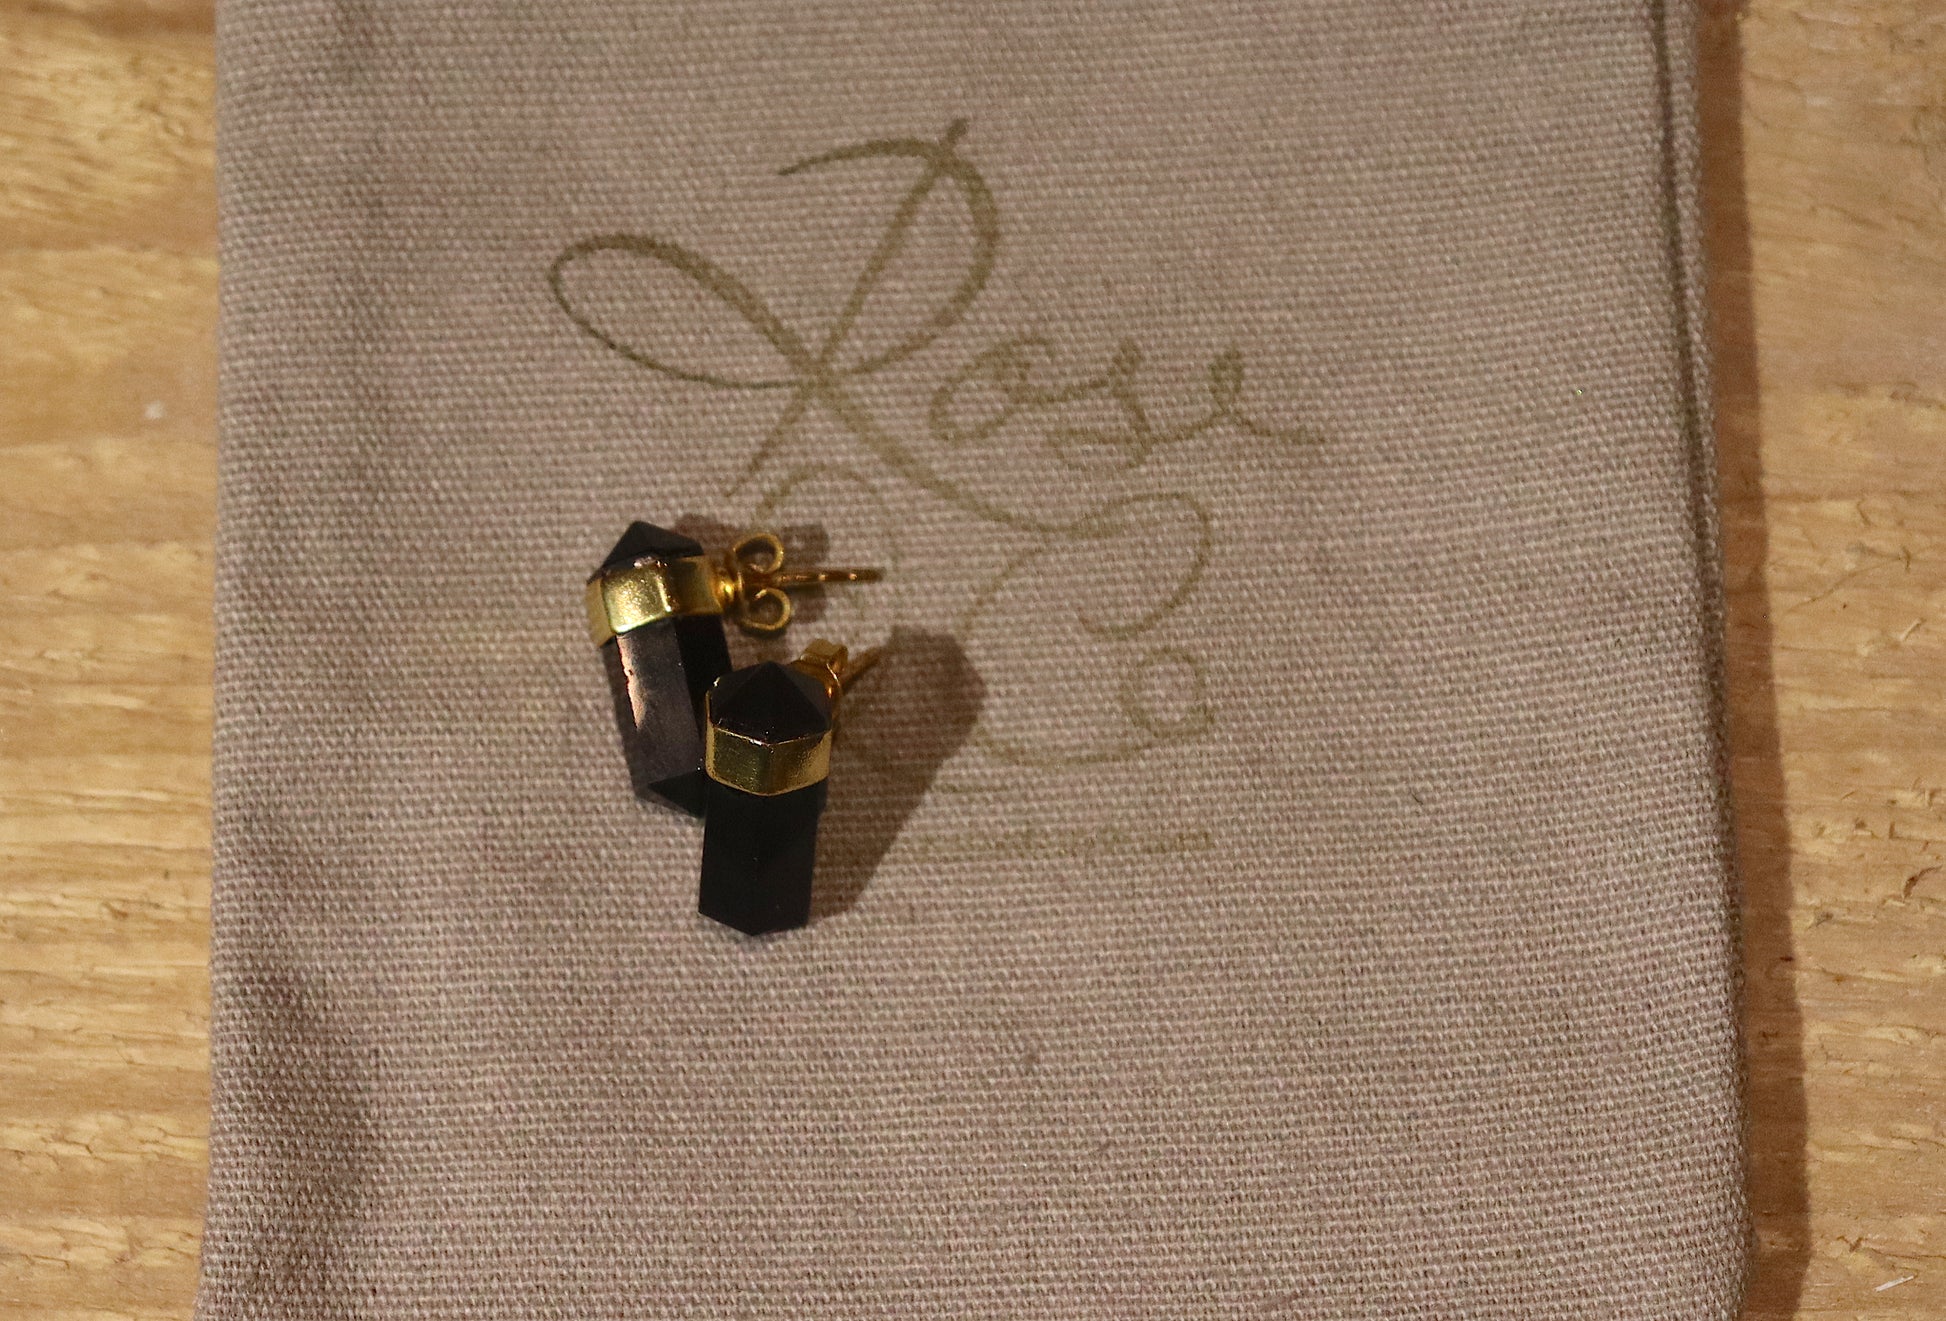 A pair of black crystal stud earrings in a gold plated setting on a grey cotton drawstring bag with a gold rose and co label stamped onto it.